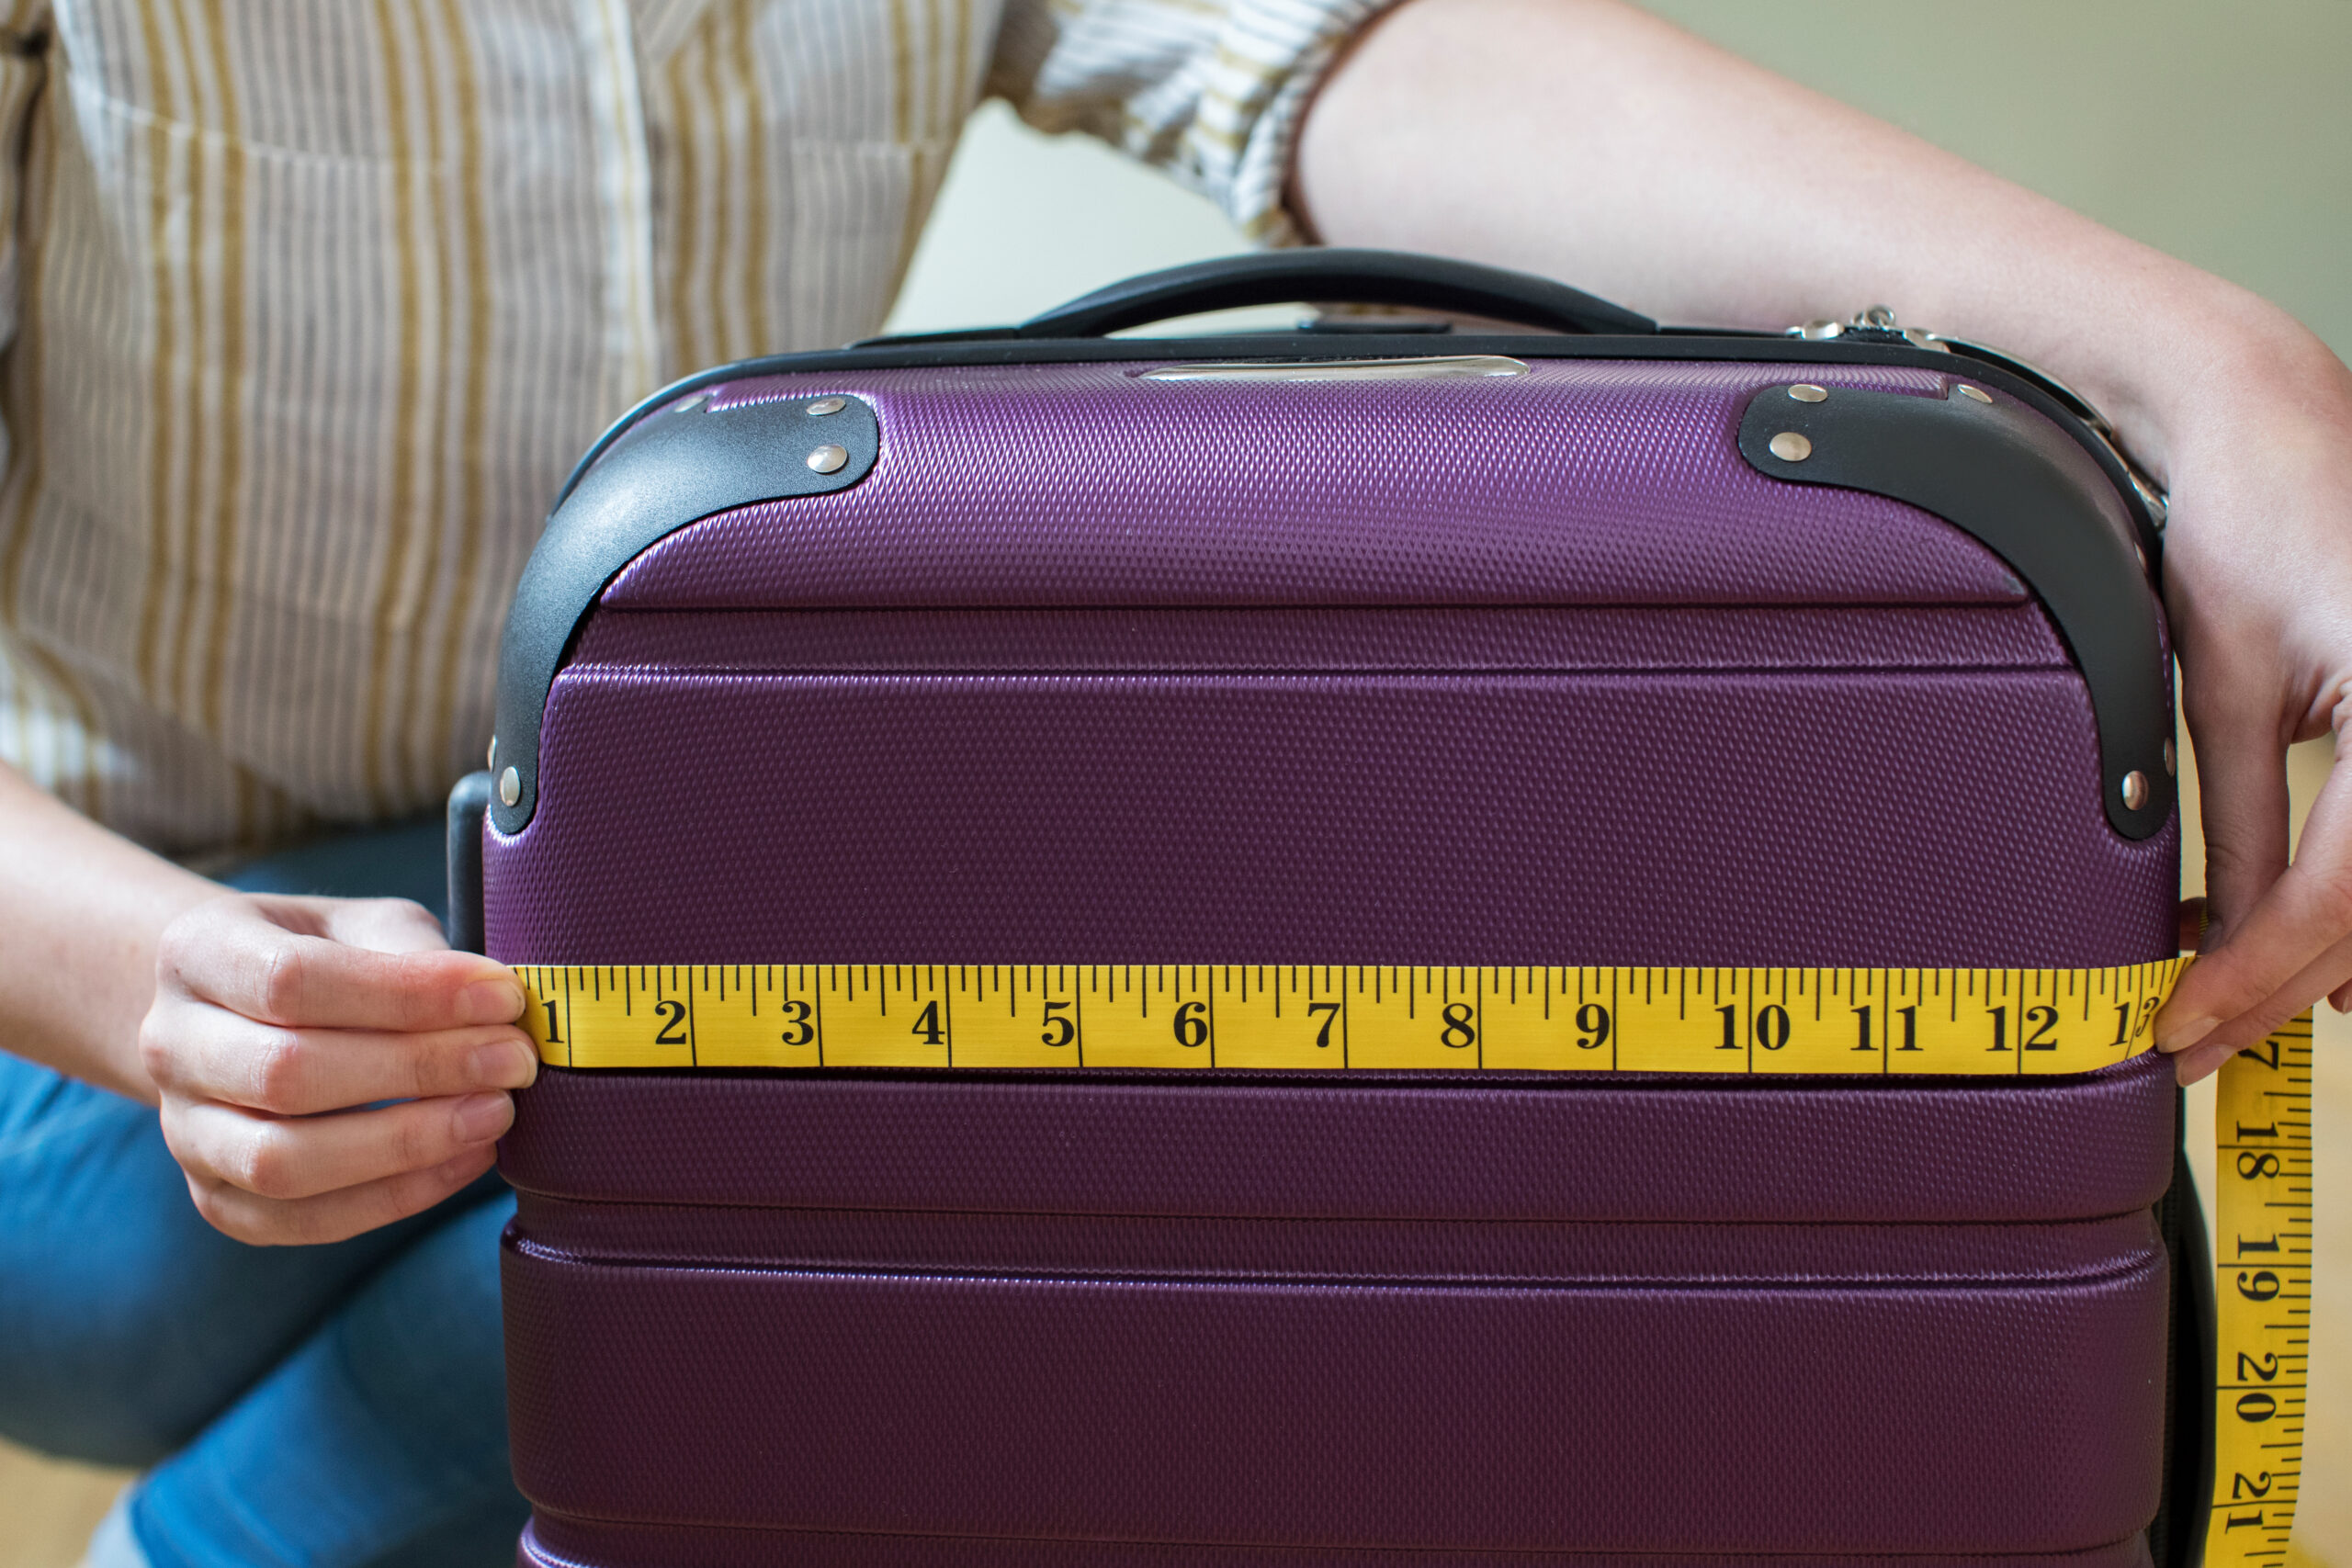 Carry-On Luggage Sizes & Dimensions by Airline